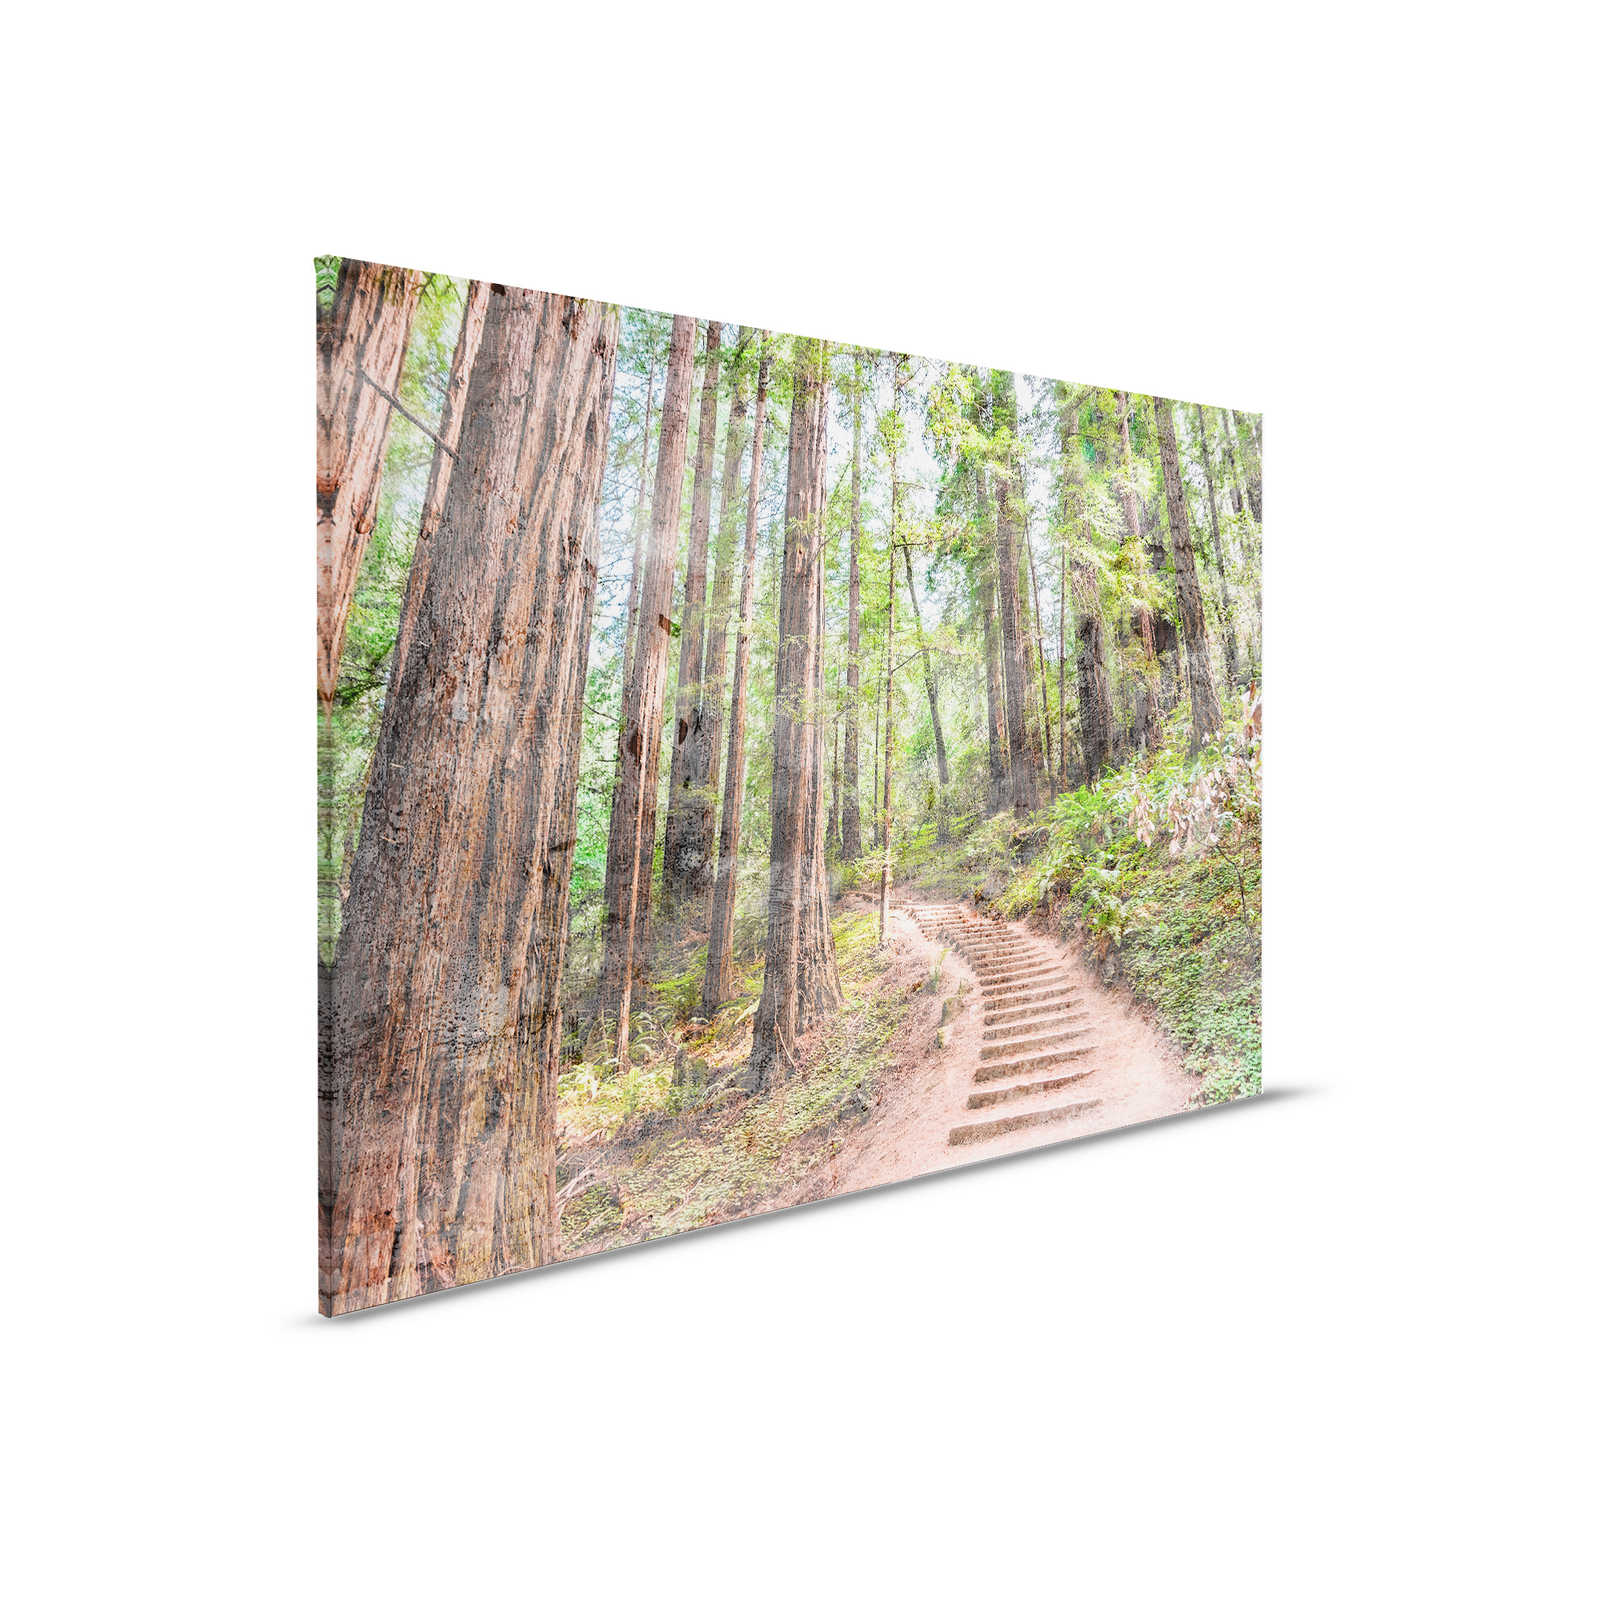 Canvas with wooden stairs through the forest | brown, green, blue - 0.90 m x 0.60 m
